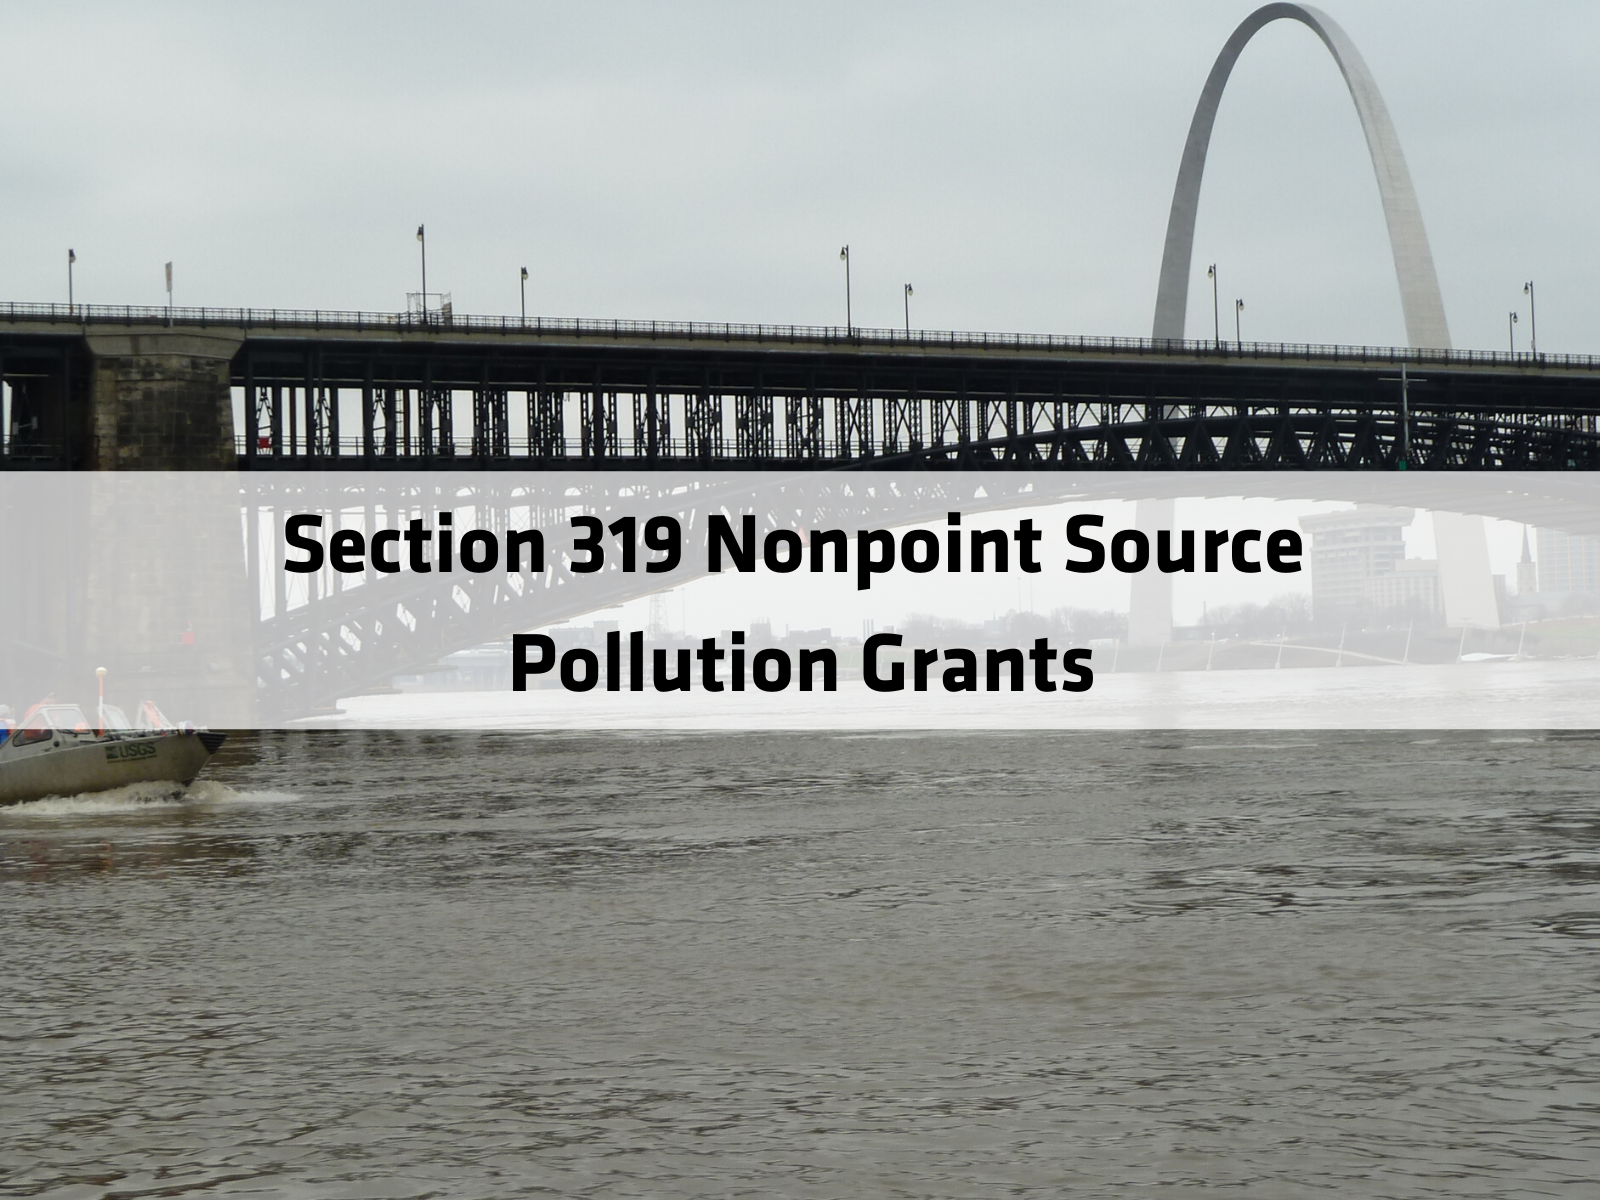 Section 319 Nonpoint Source Pollution Grants